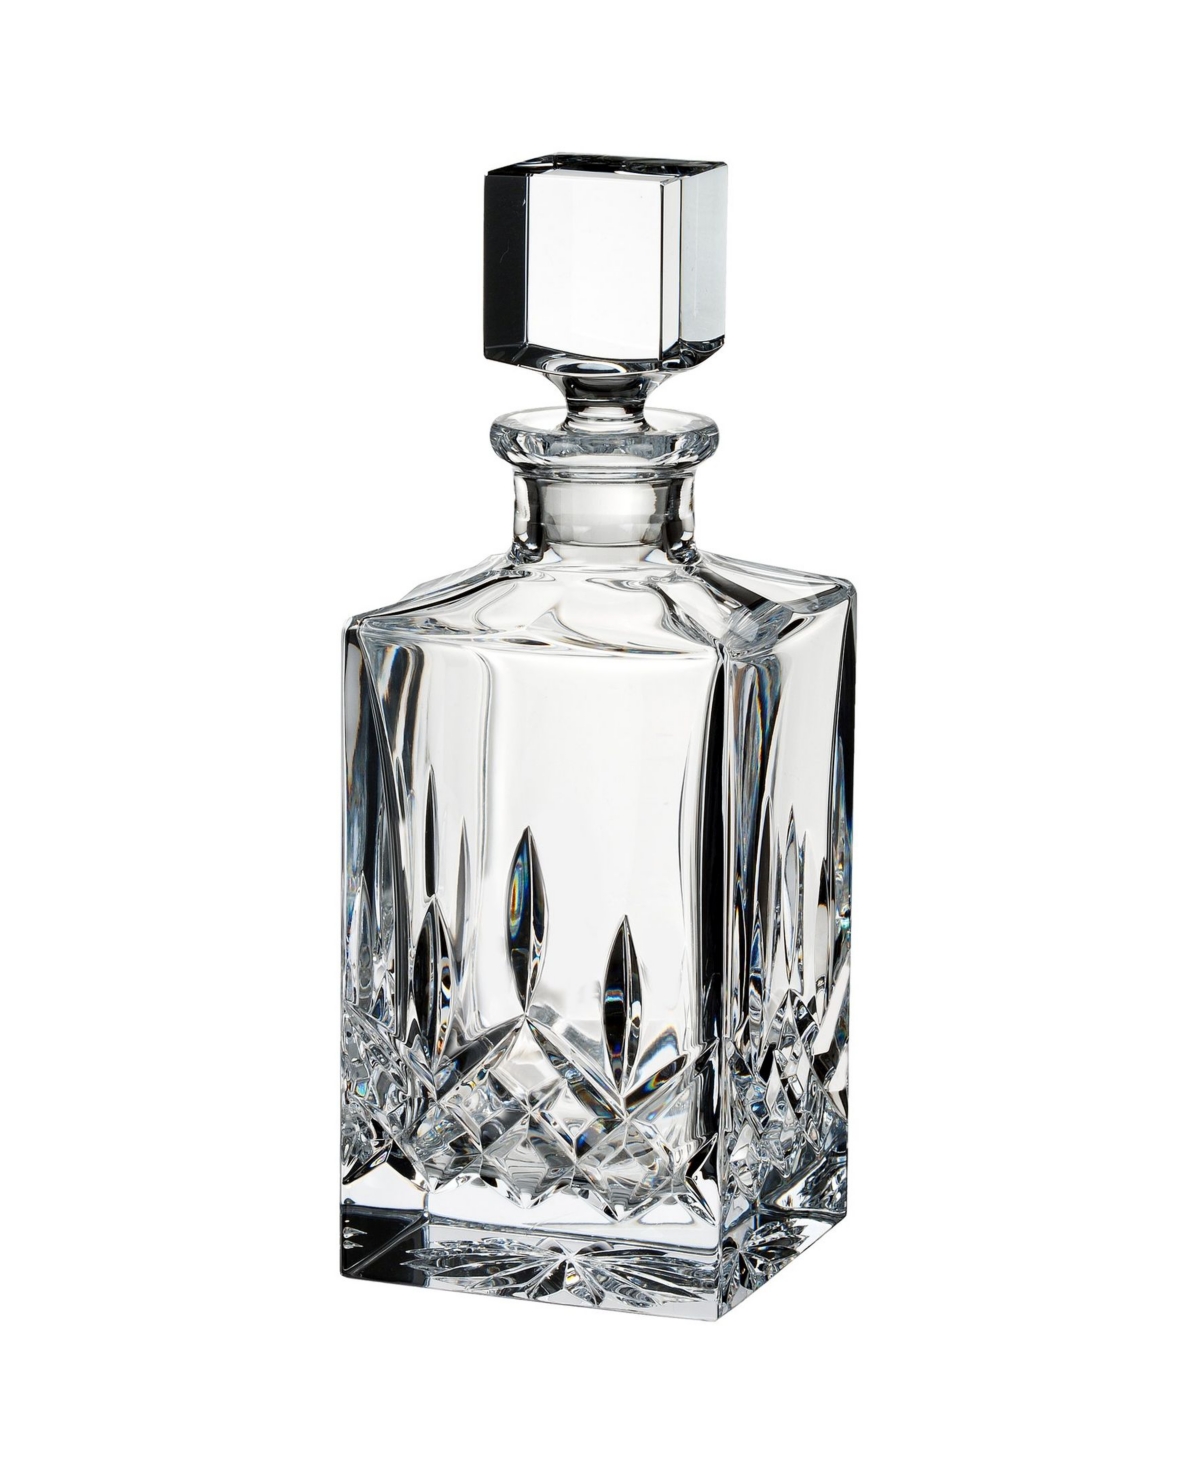 Waterford Lismore Square Decanter, Clear